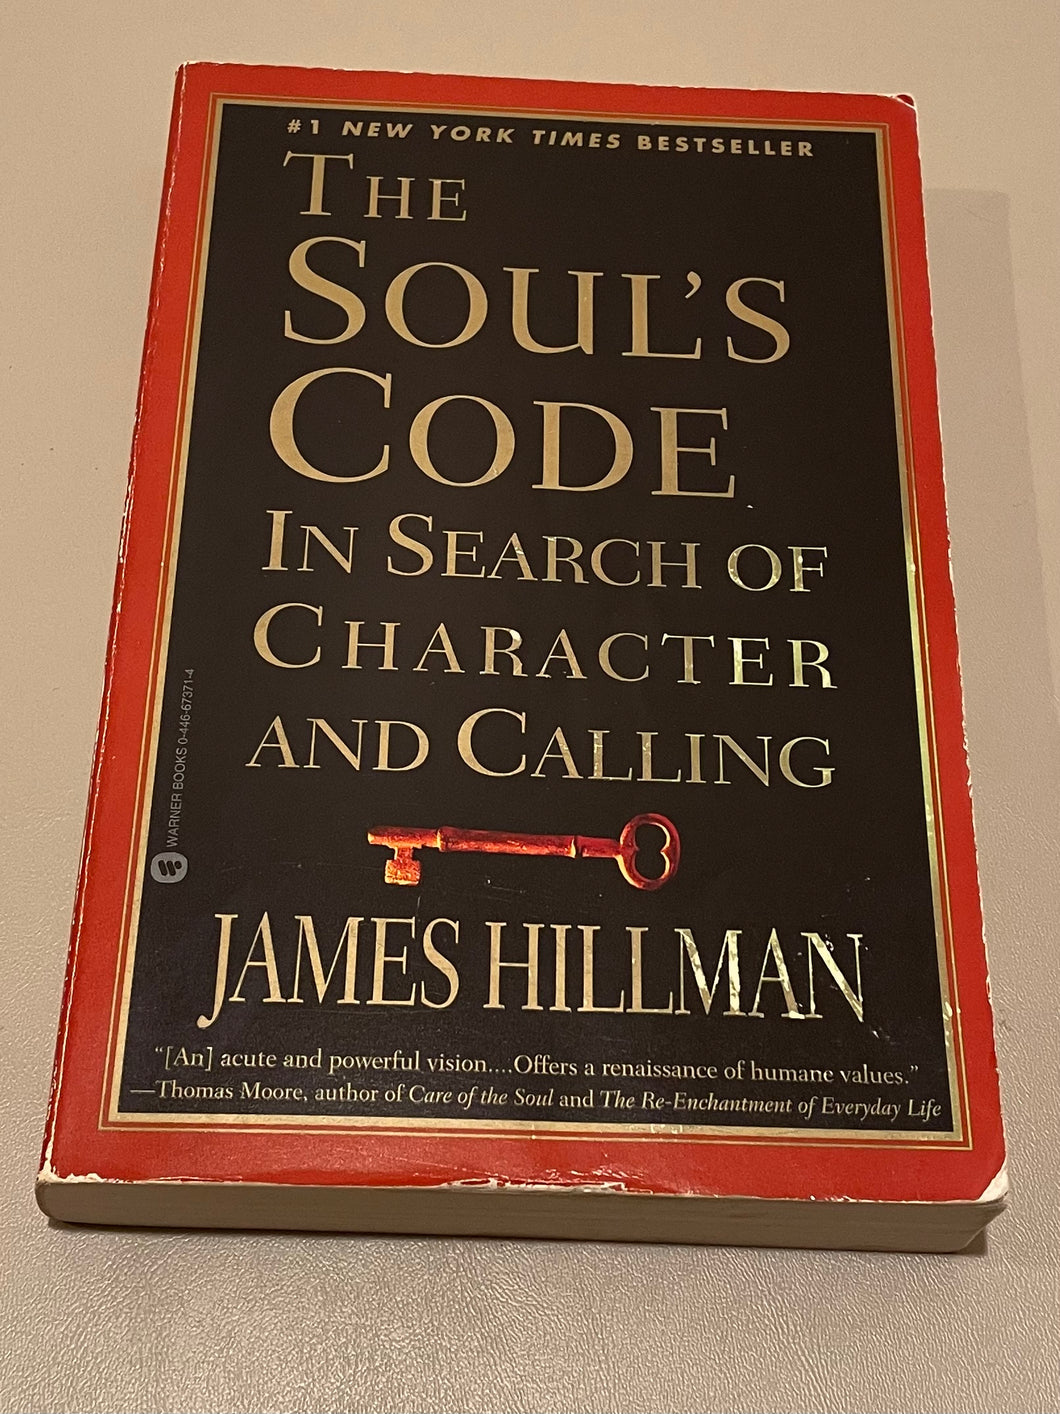 THE SOUL’S CODE